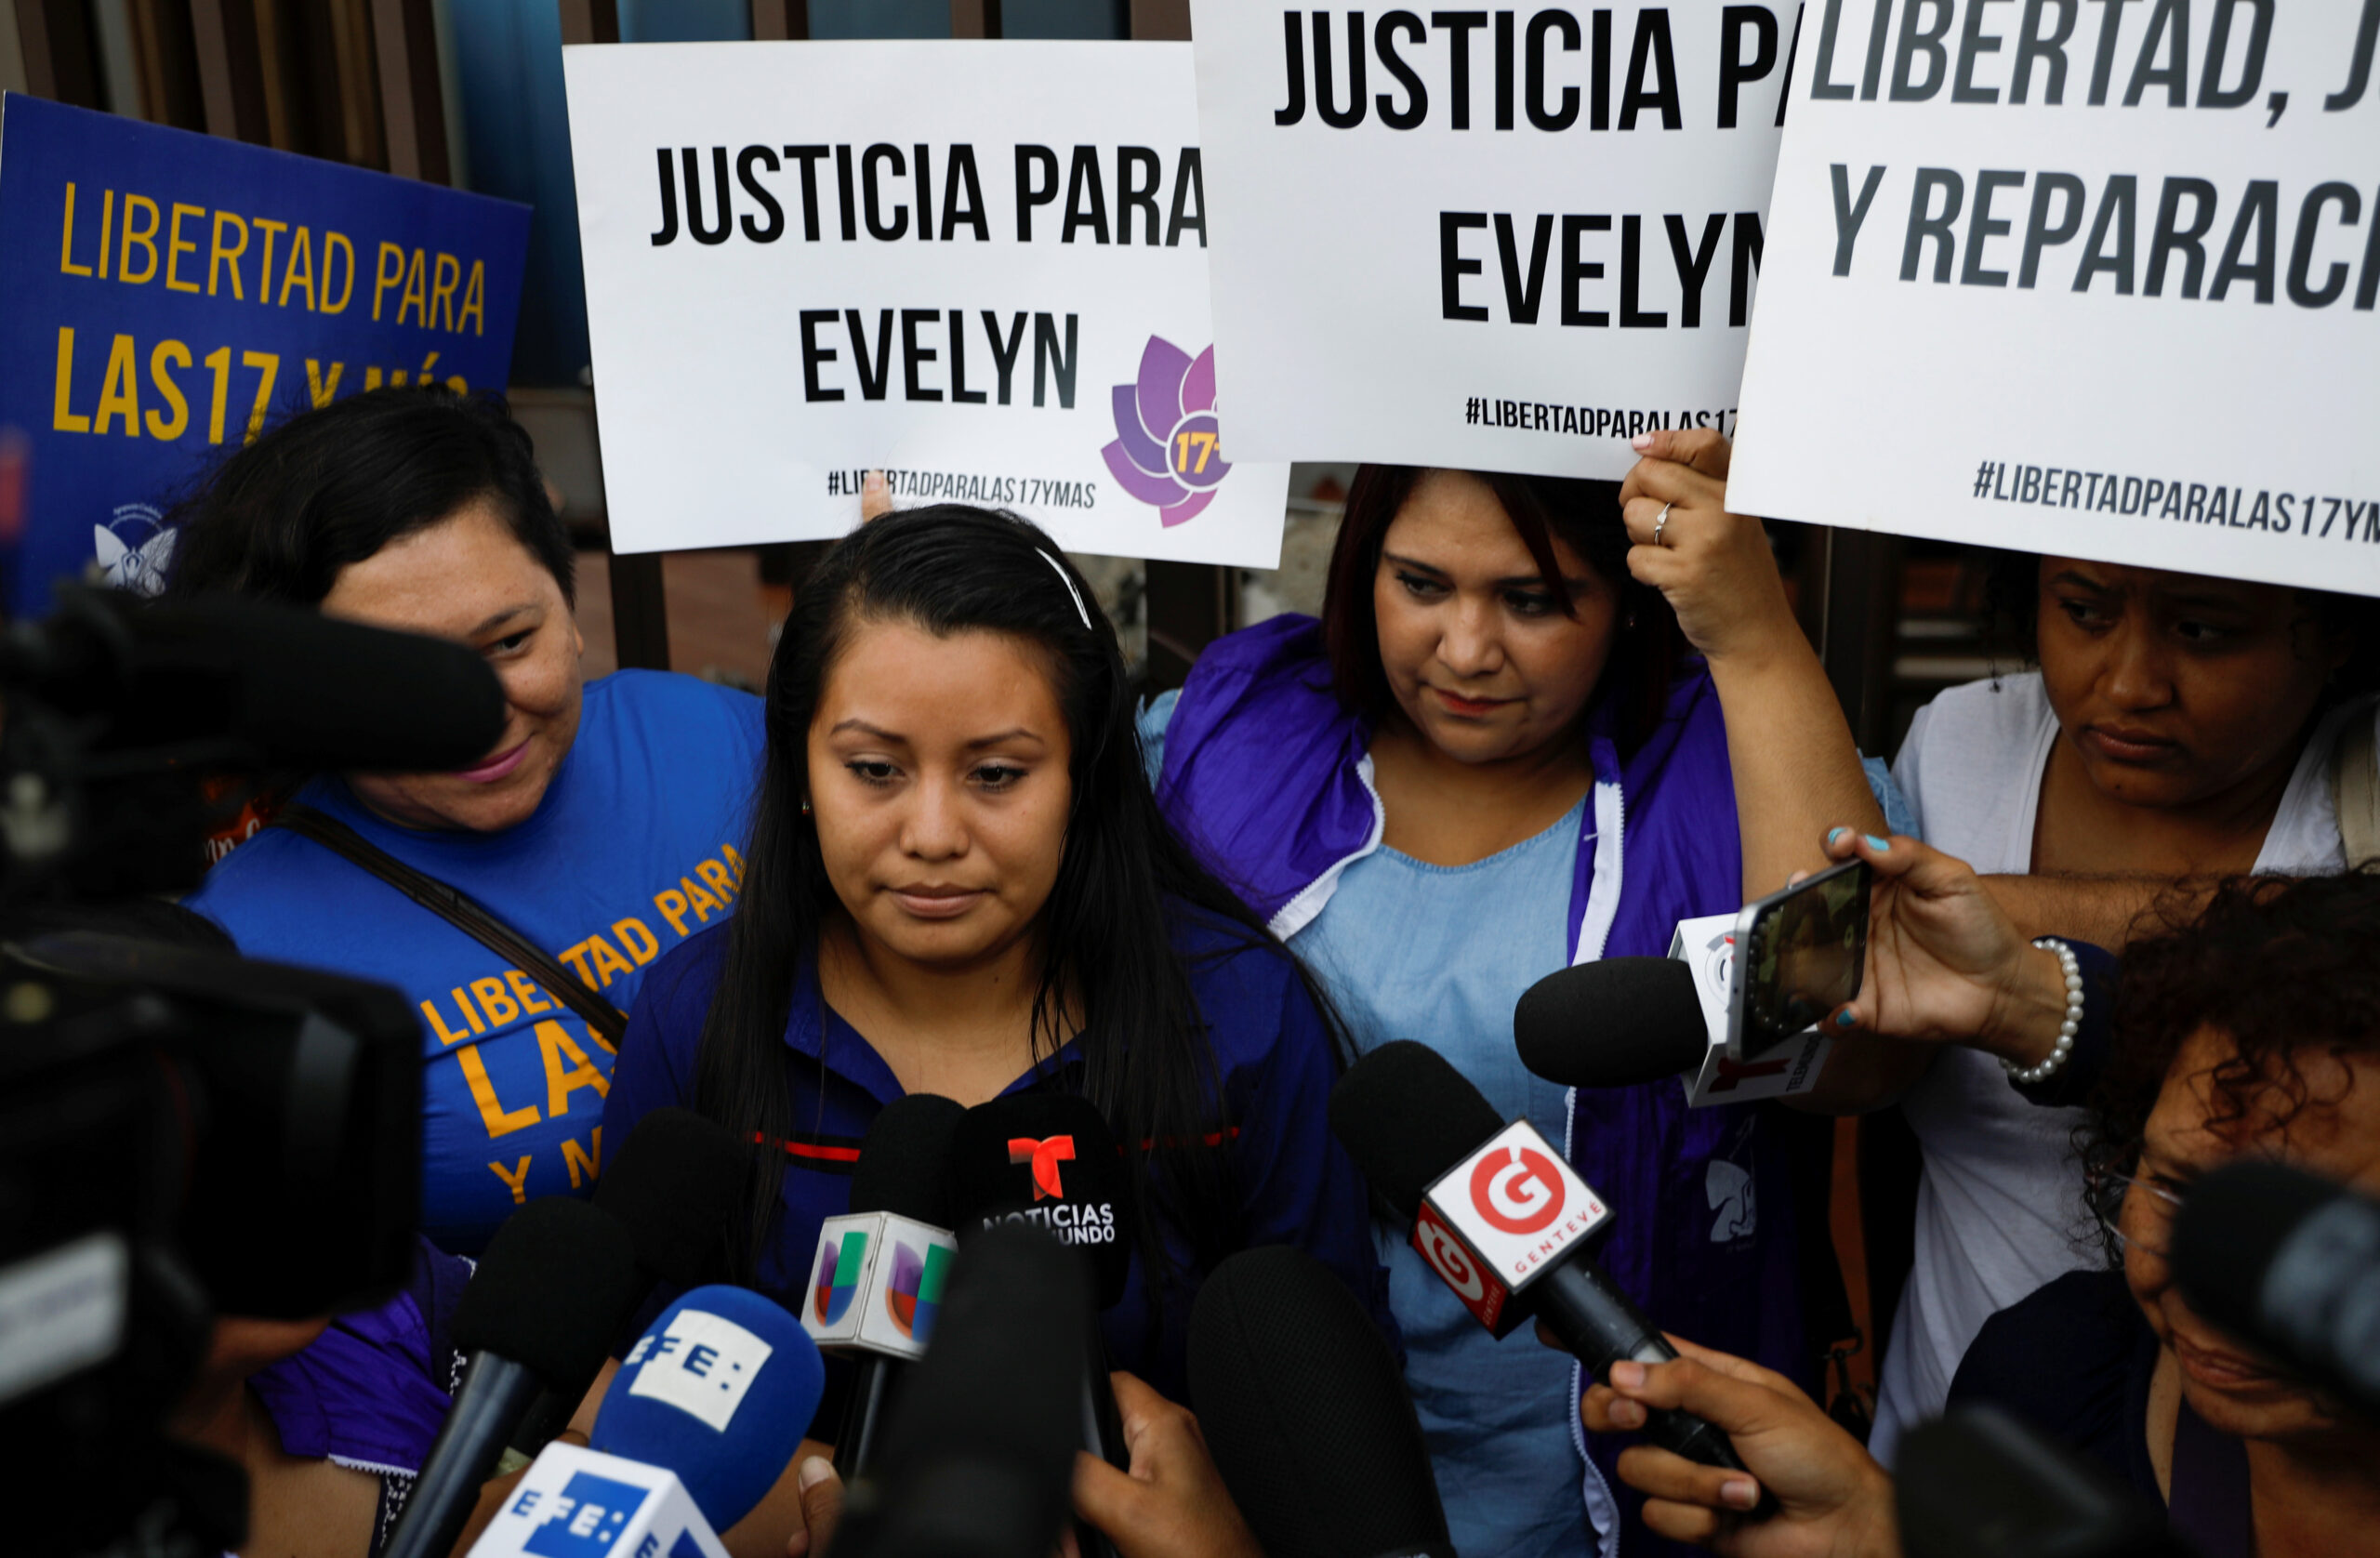 Evelyn Hernandez speaks to the media as she arrives for a hearing in El Salvador. Placards read "Justice for Evelyn". (REUTERS/Jose Cabezas)